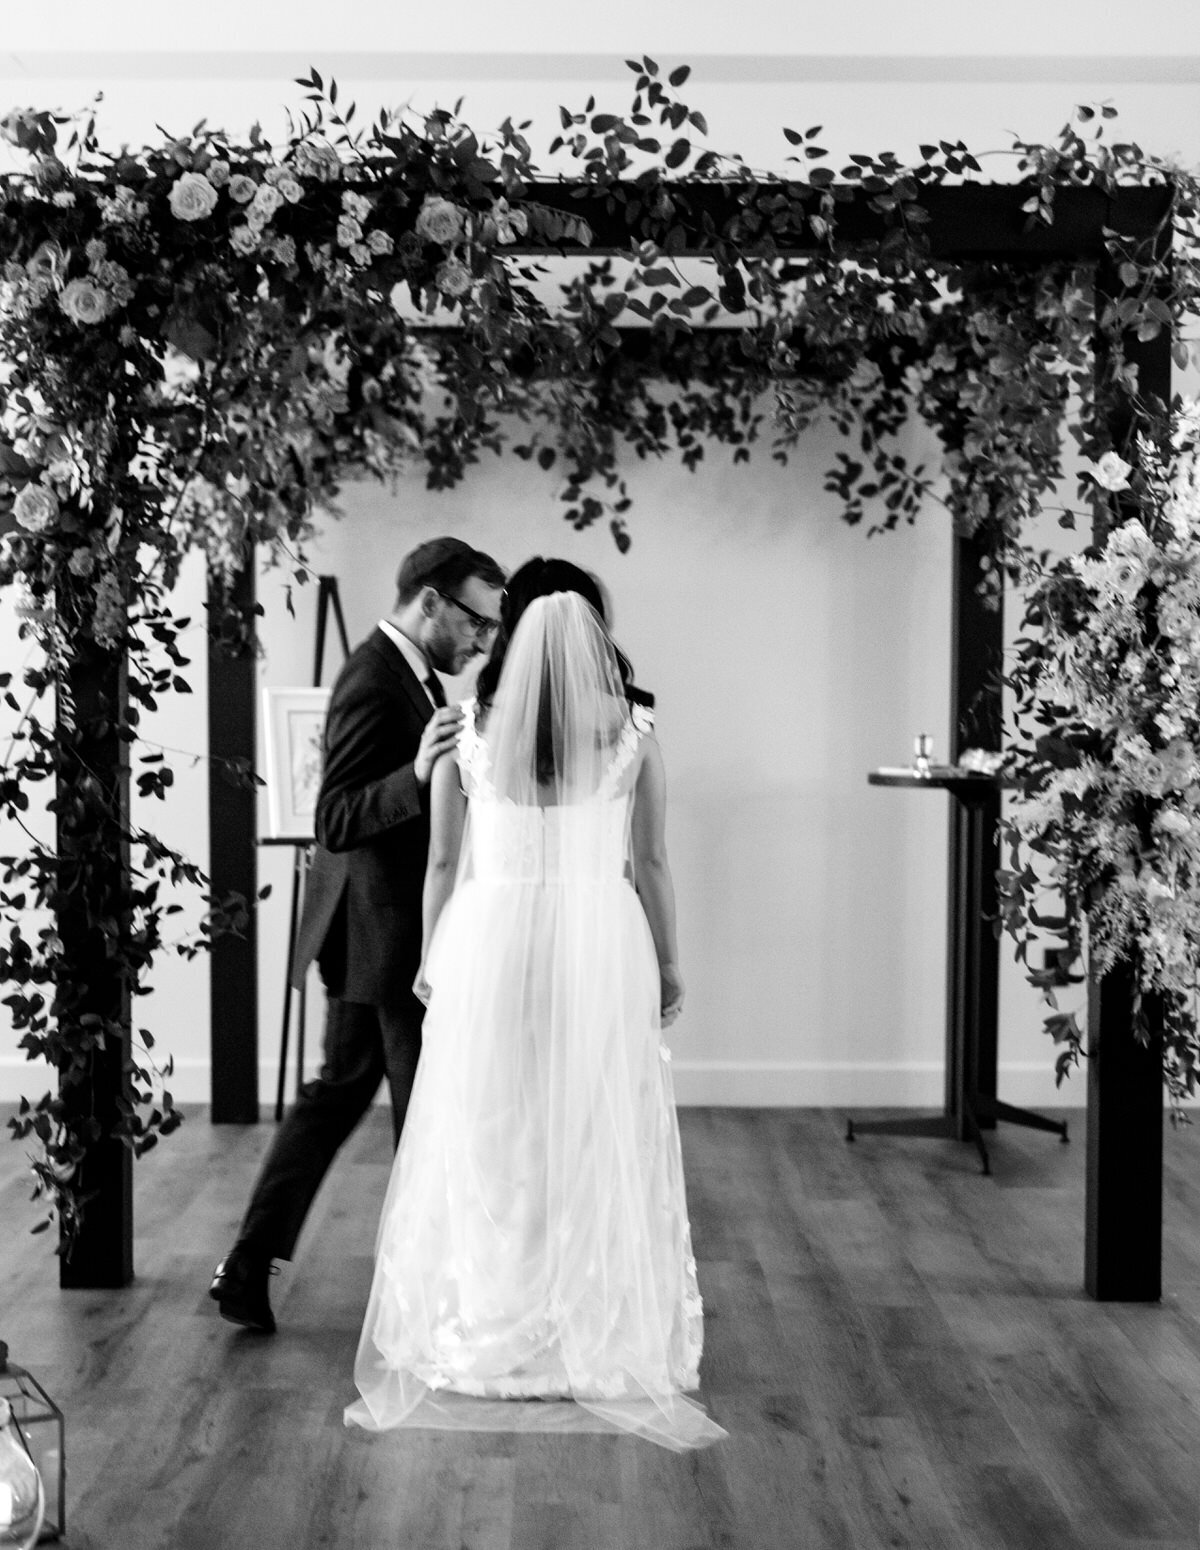 Creative Wedding Photography at The Riggs Hotel in Washington DC 15